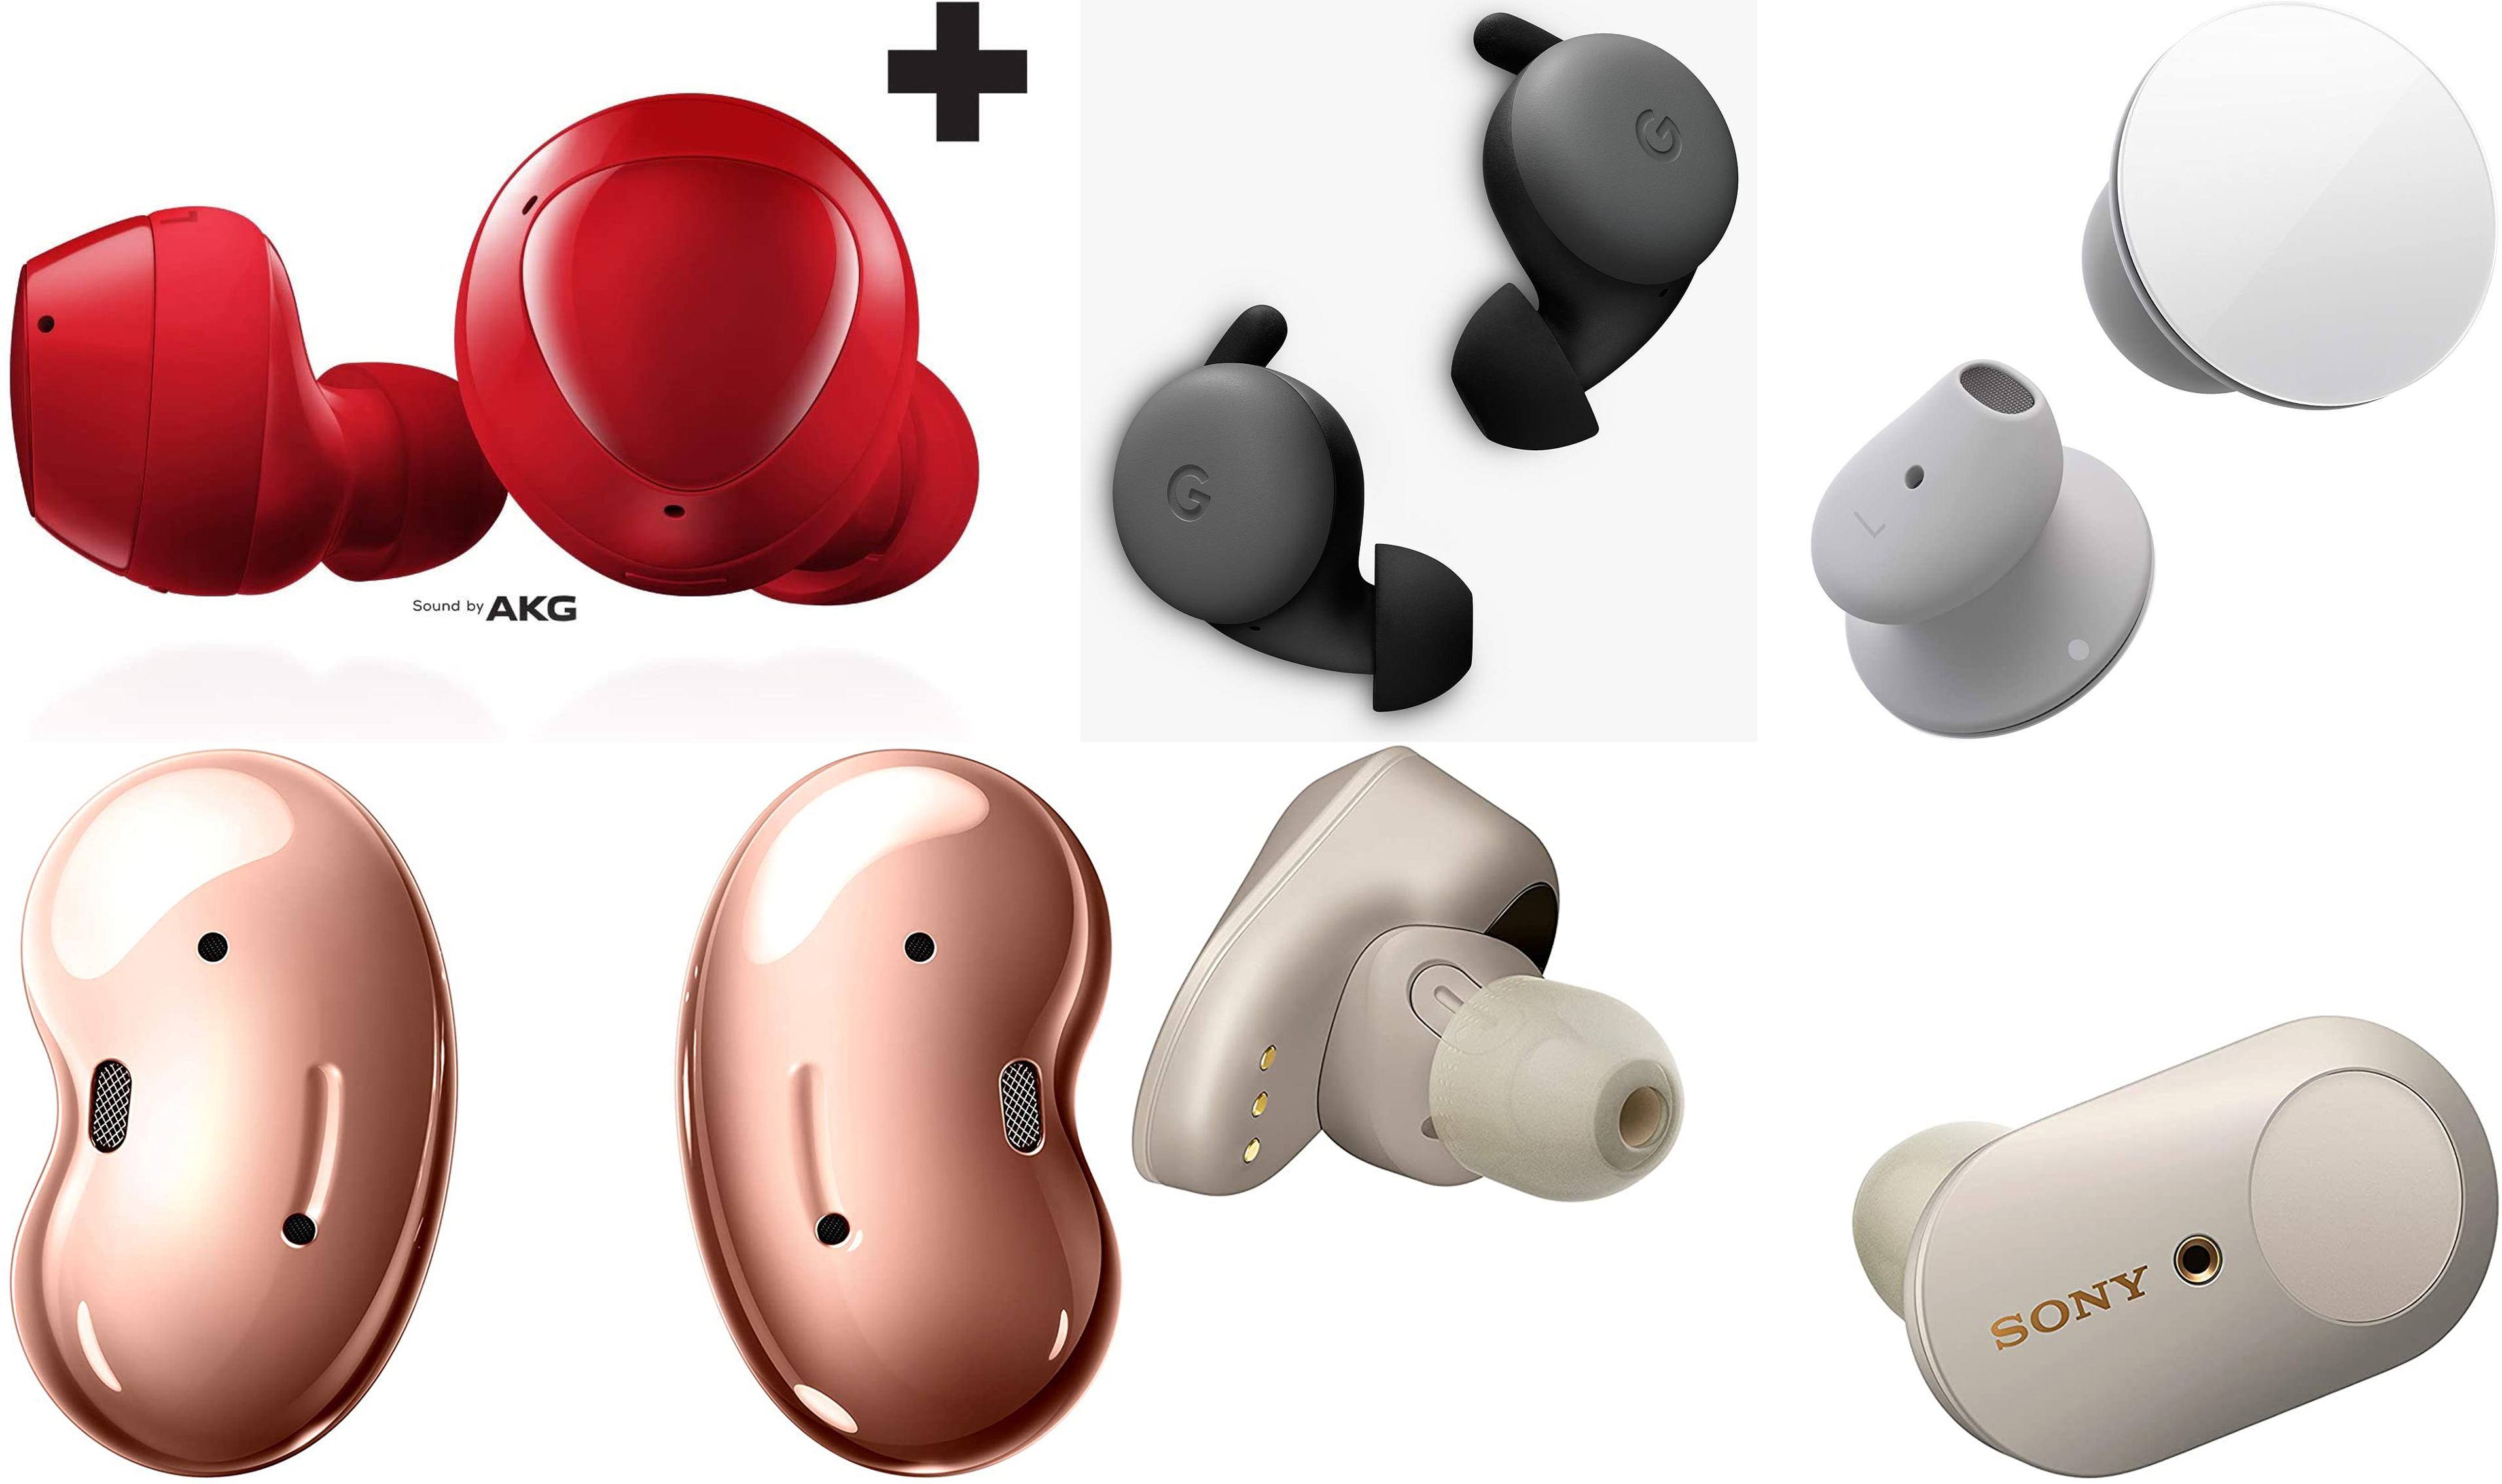 Top 5 truly wireless earbuds 2020 – AirPods competitors